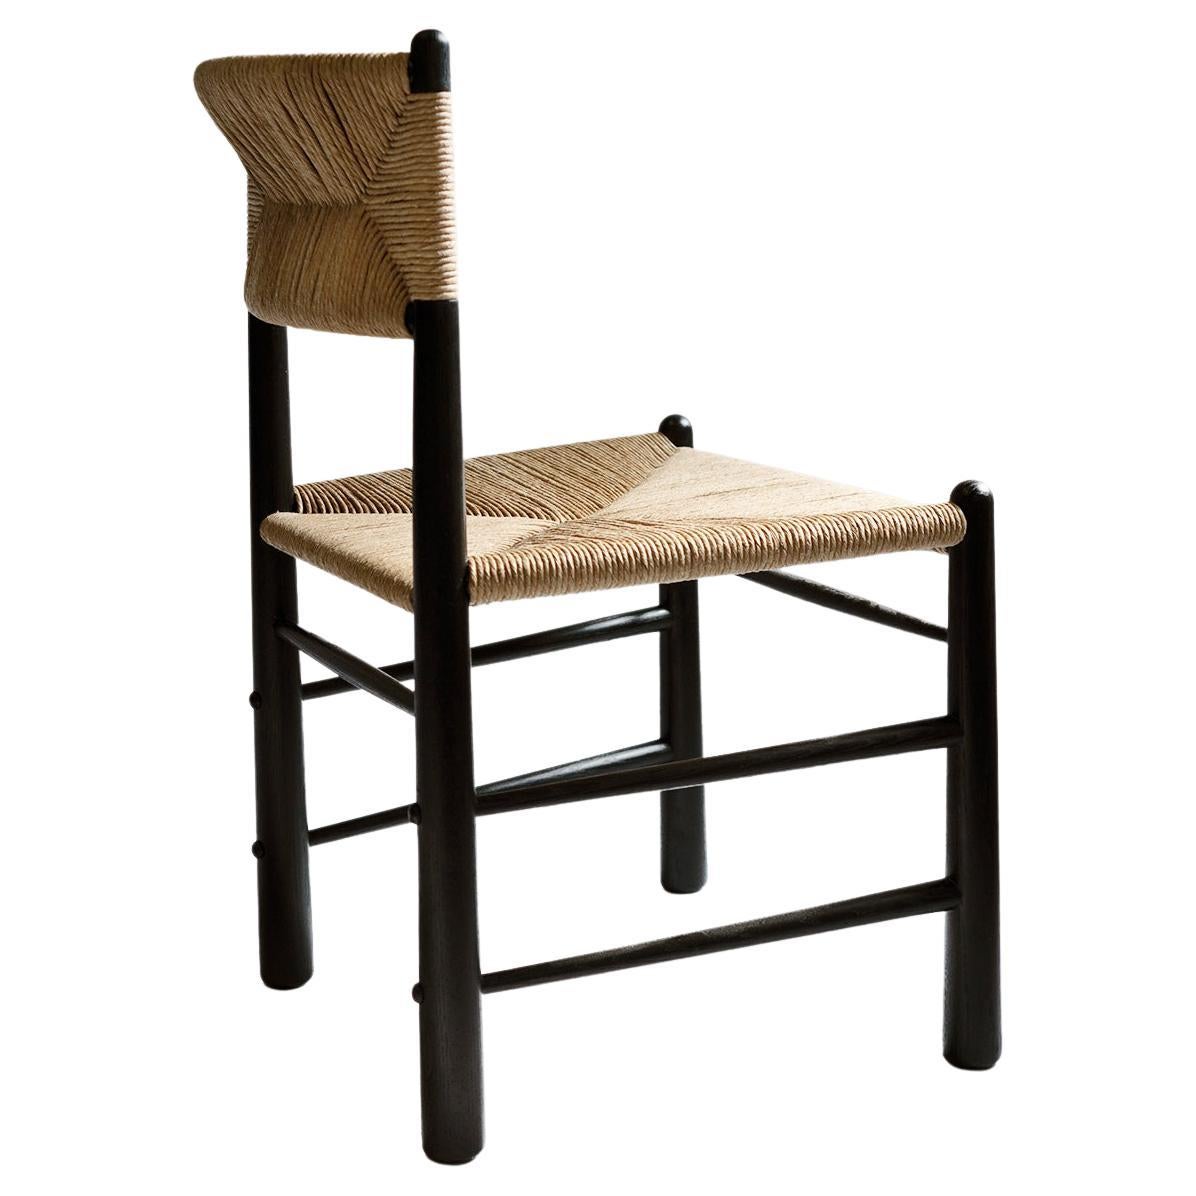 Canadian Ewa Dining Chair, Blackened Oak with Natural Fiber Rush For Sale